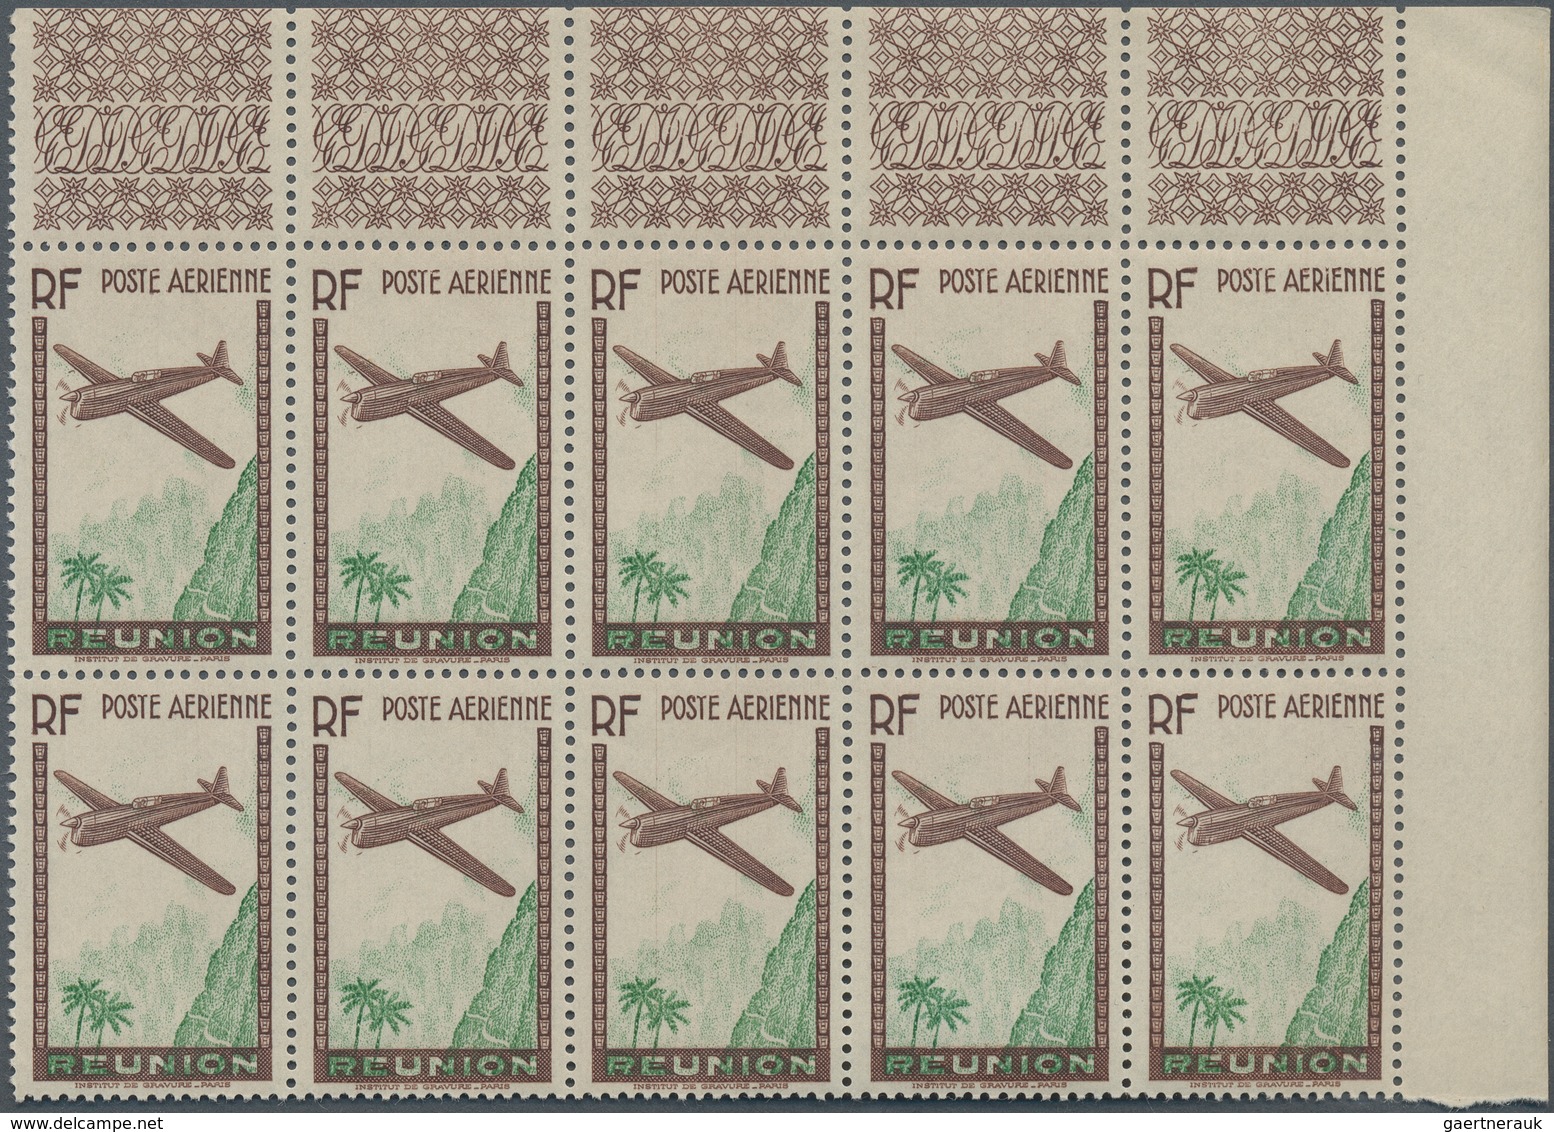 Reunion: 1938, Airmail Issue ‚airplane Over Mountains‘ (12.65fr.) Brown/green With MISSING DENOMINAT - Ungebraucht